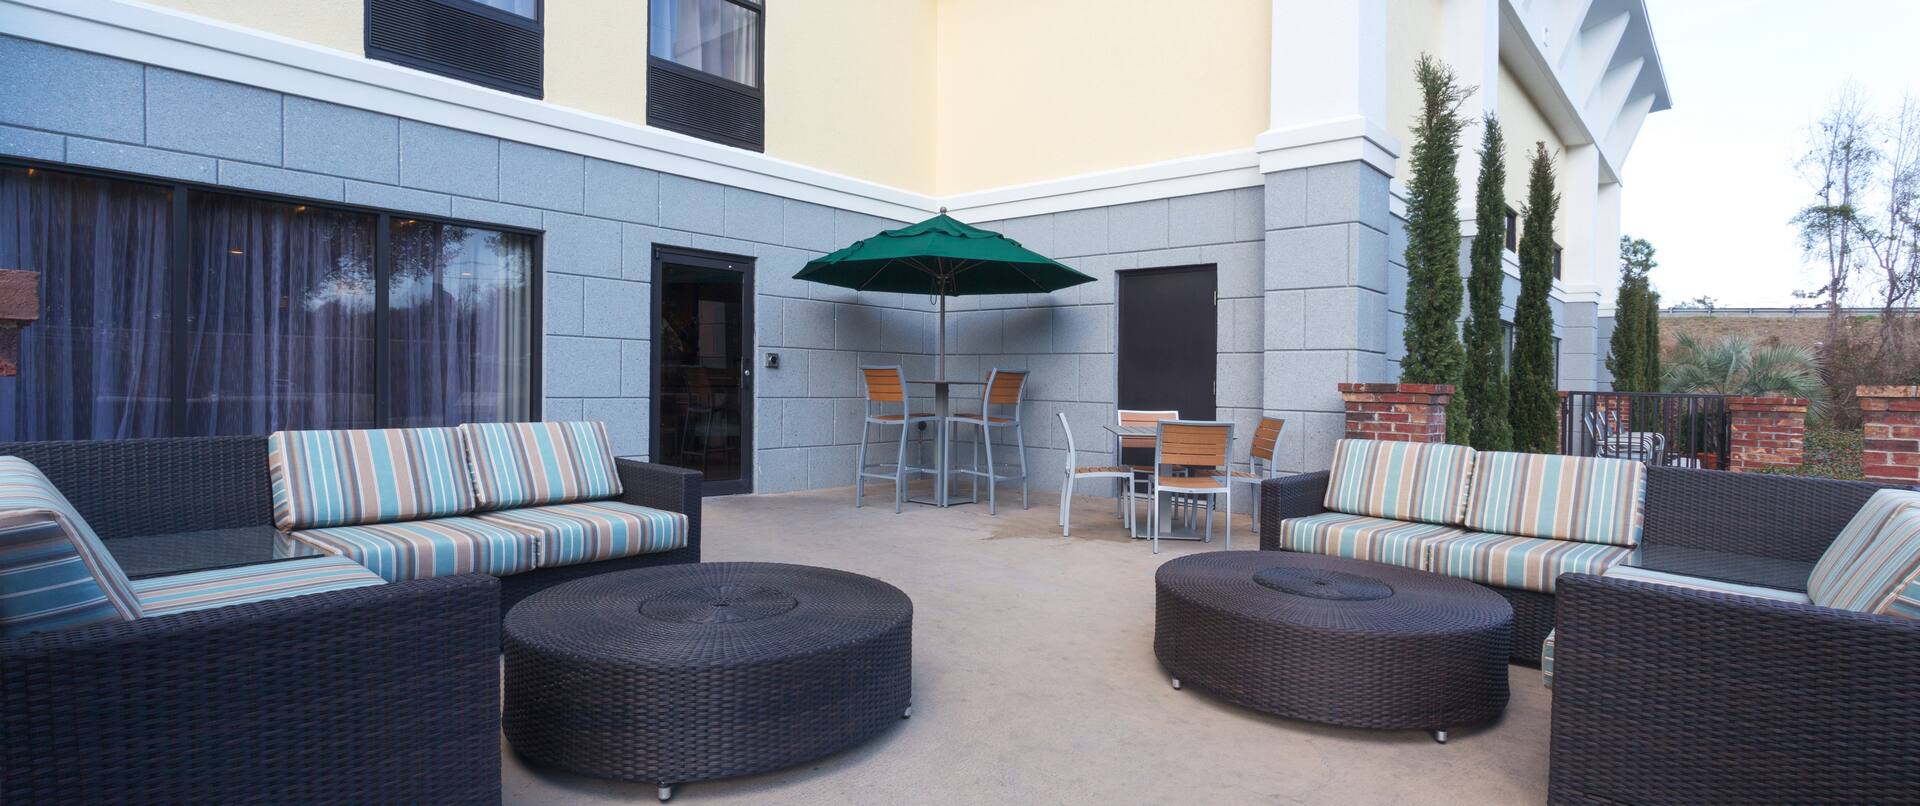 Outdoor Seating Area  